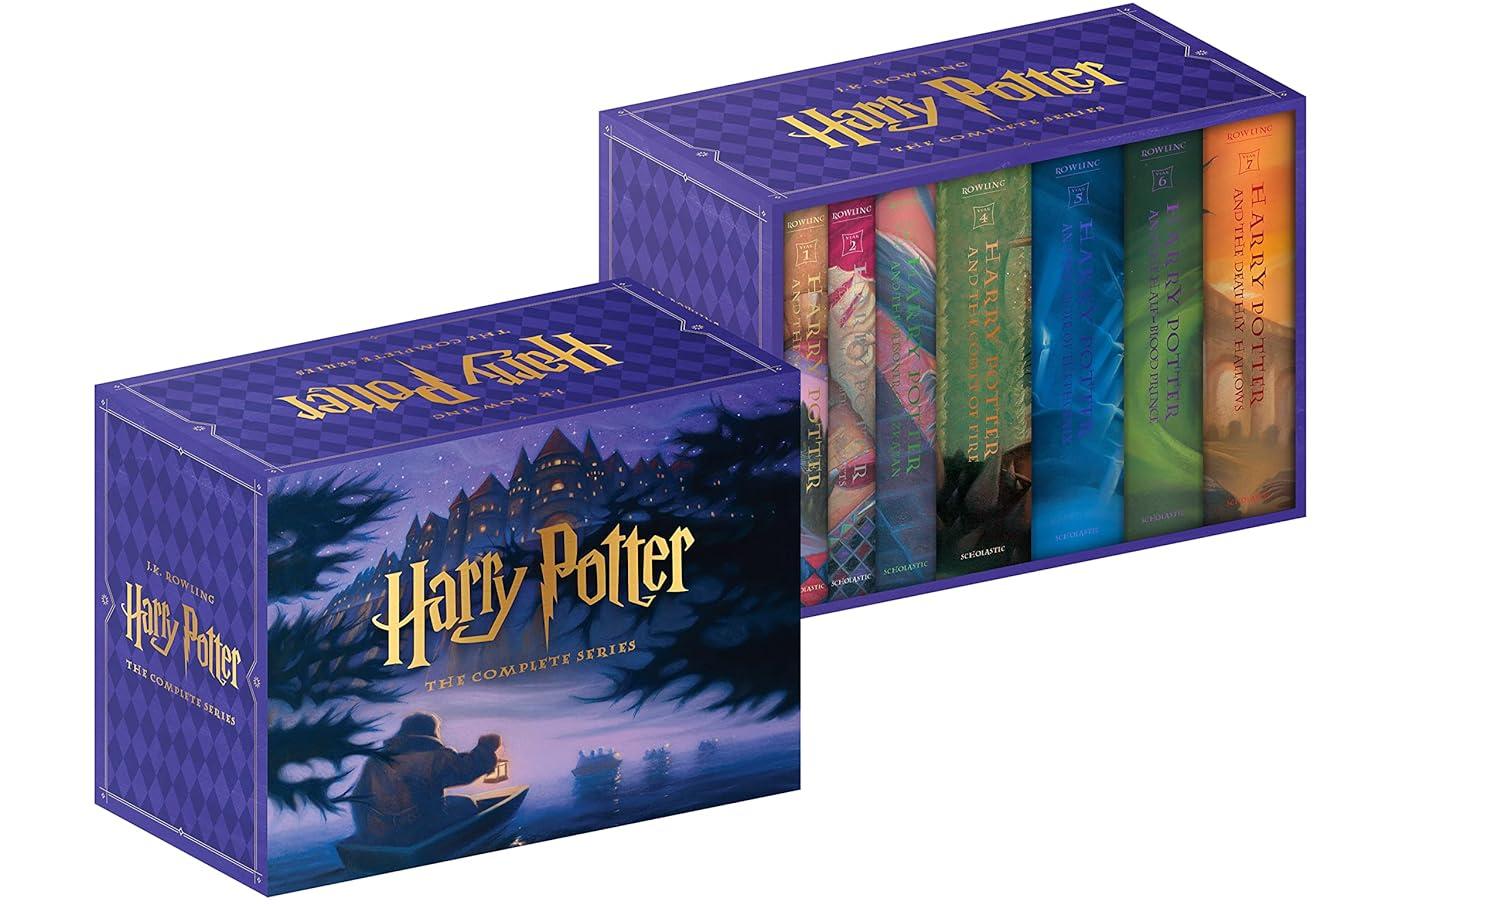 Harry Potter Hardcover Boxed Set Books 1-7 with Slipcase for $128.42 Shipped